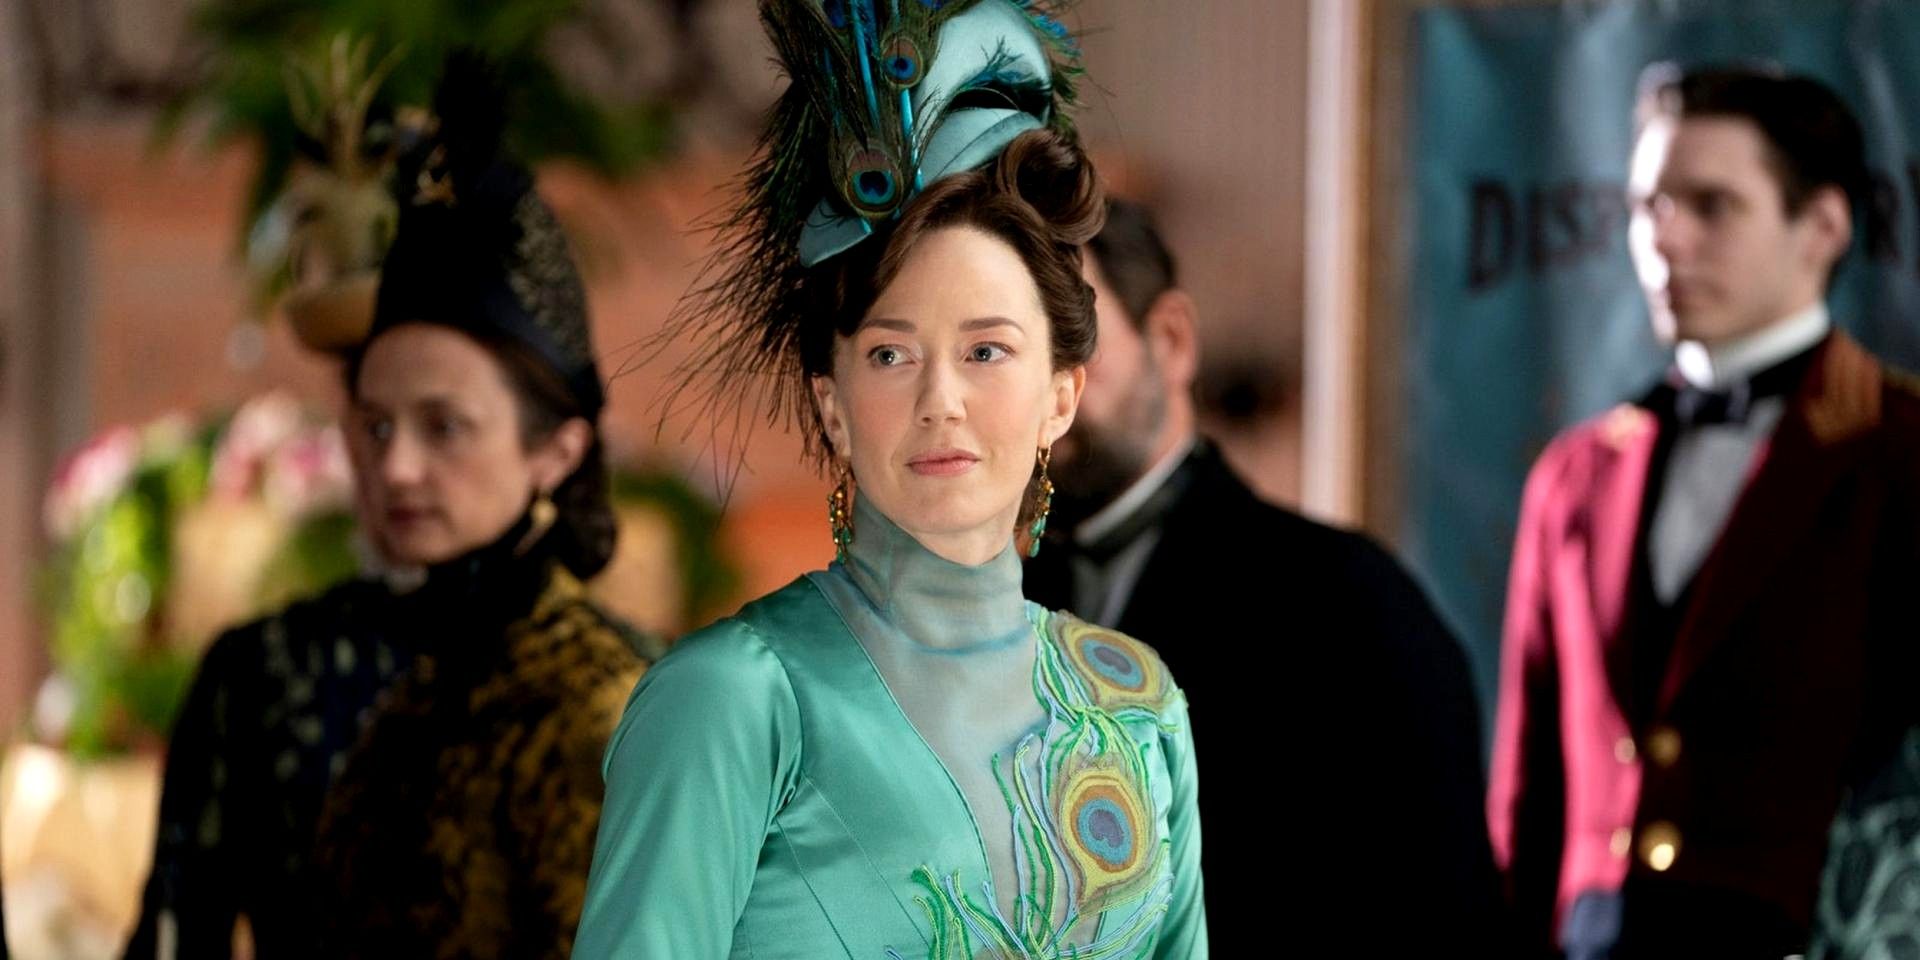 Carrie Coon as Bertha Russell in The Gilded Age. She's wearing a dress with peacock designs on it.